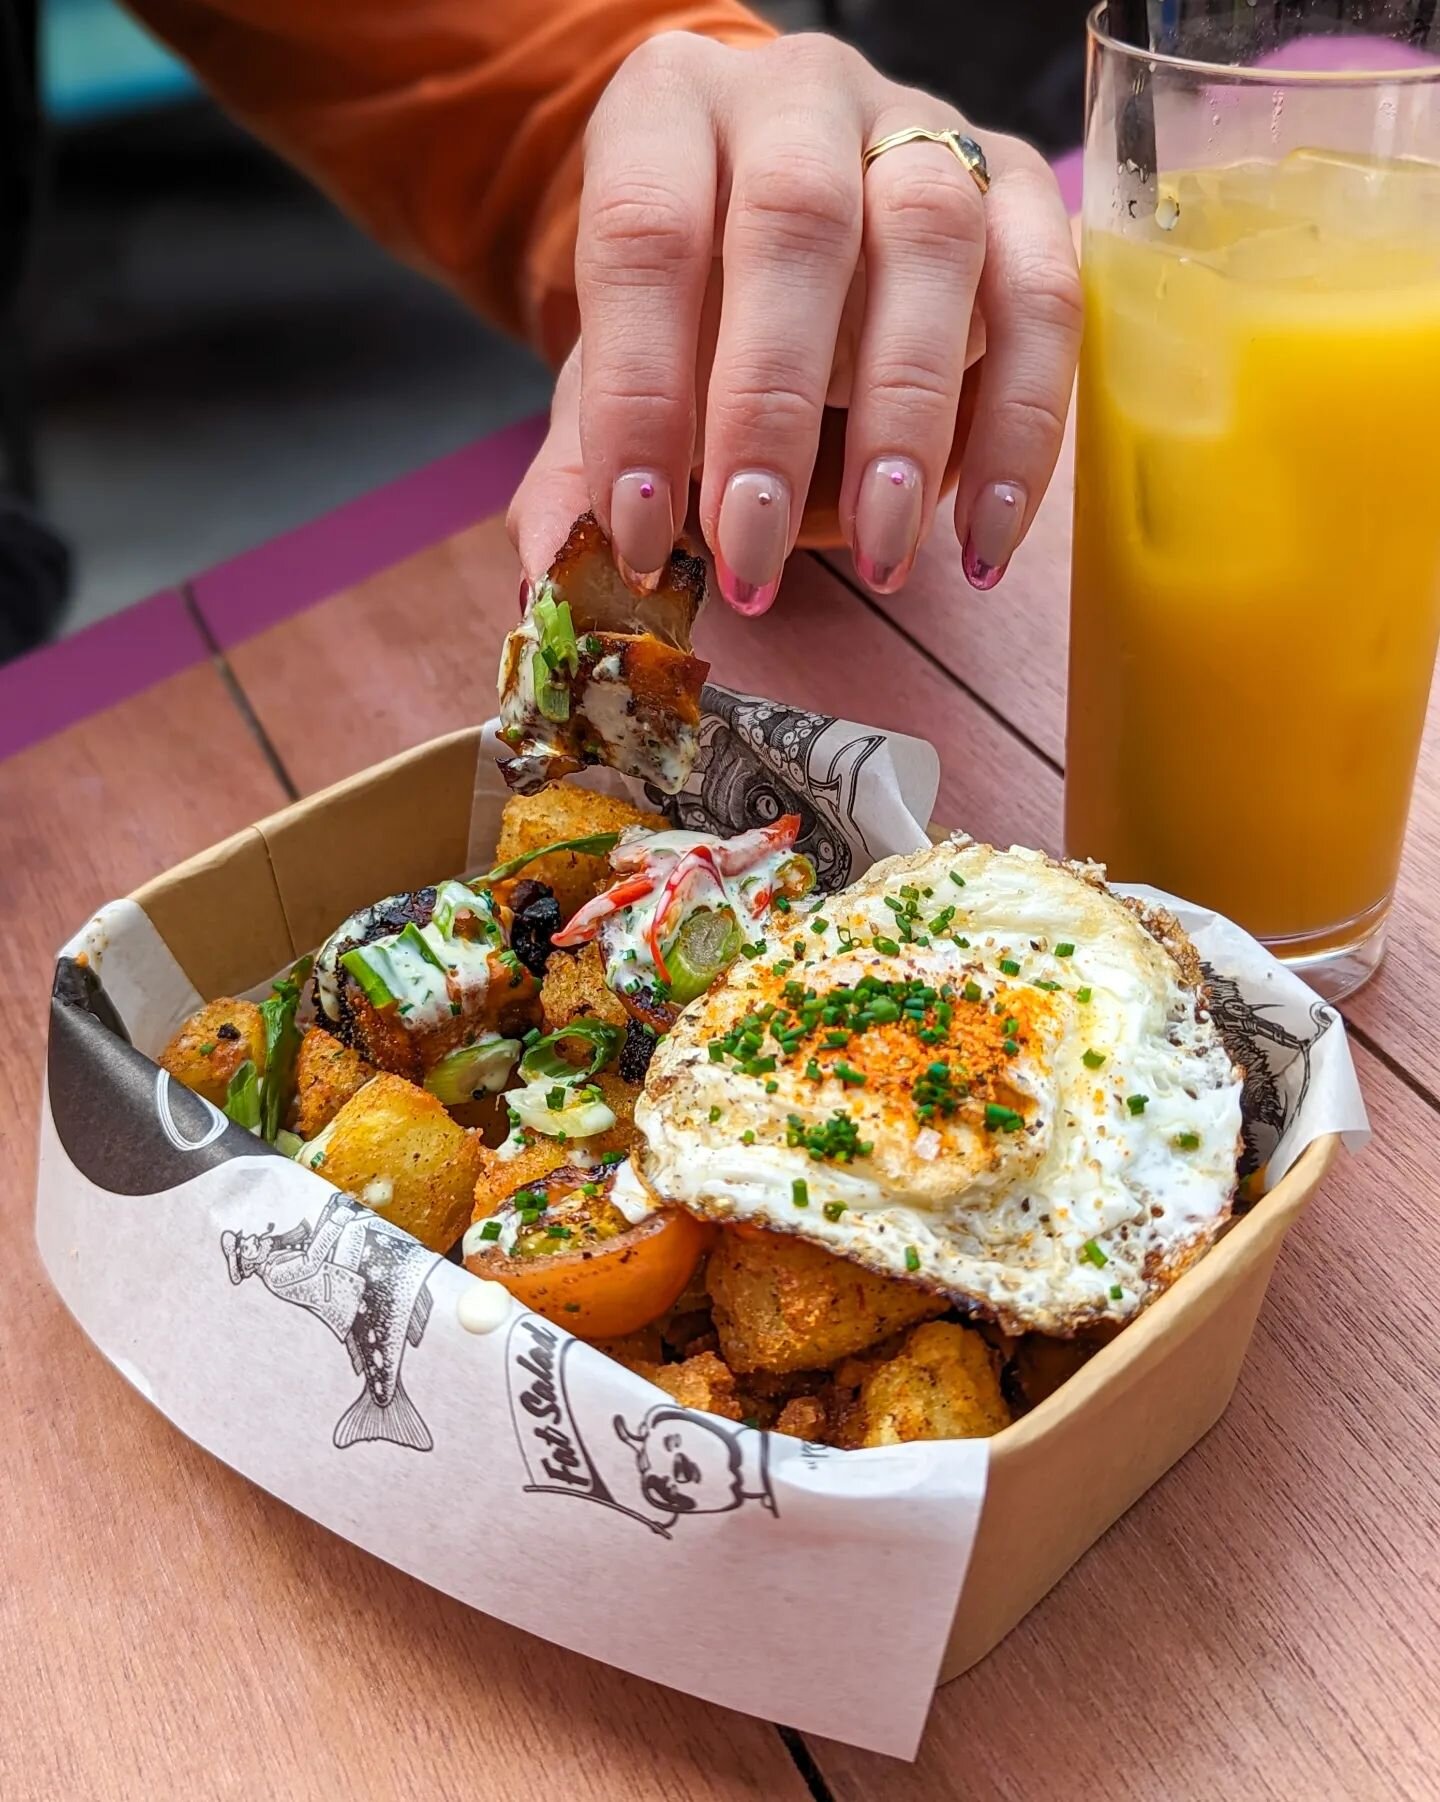 🤠your gluten free guide to fringe is here🤠

LINK IN BIO - ft the new brunch at ESF, chicken skoop and of course we've got pizza 🍕

For the rest of your gluten free needs my main Edinburgh guide has over 50 SAFE GLUTEN FREE PLACES ✨✨✨✨✨✨✨✨ LMK what